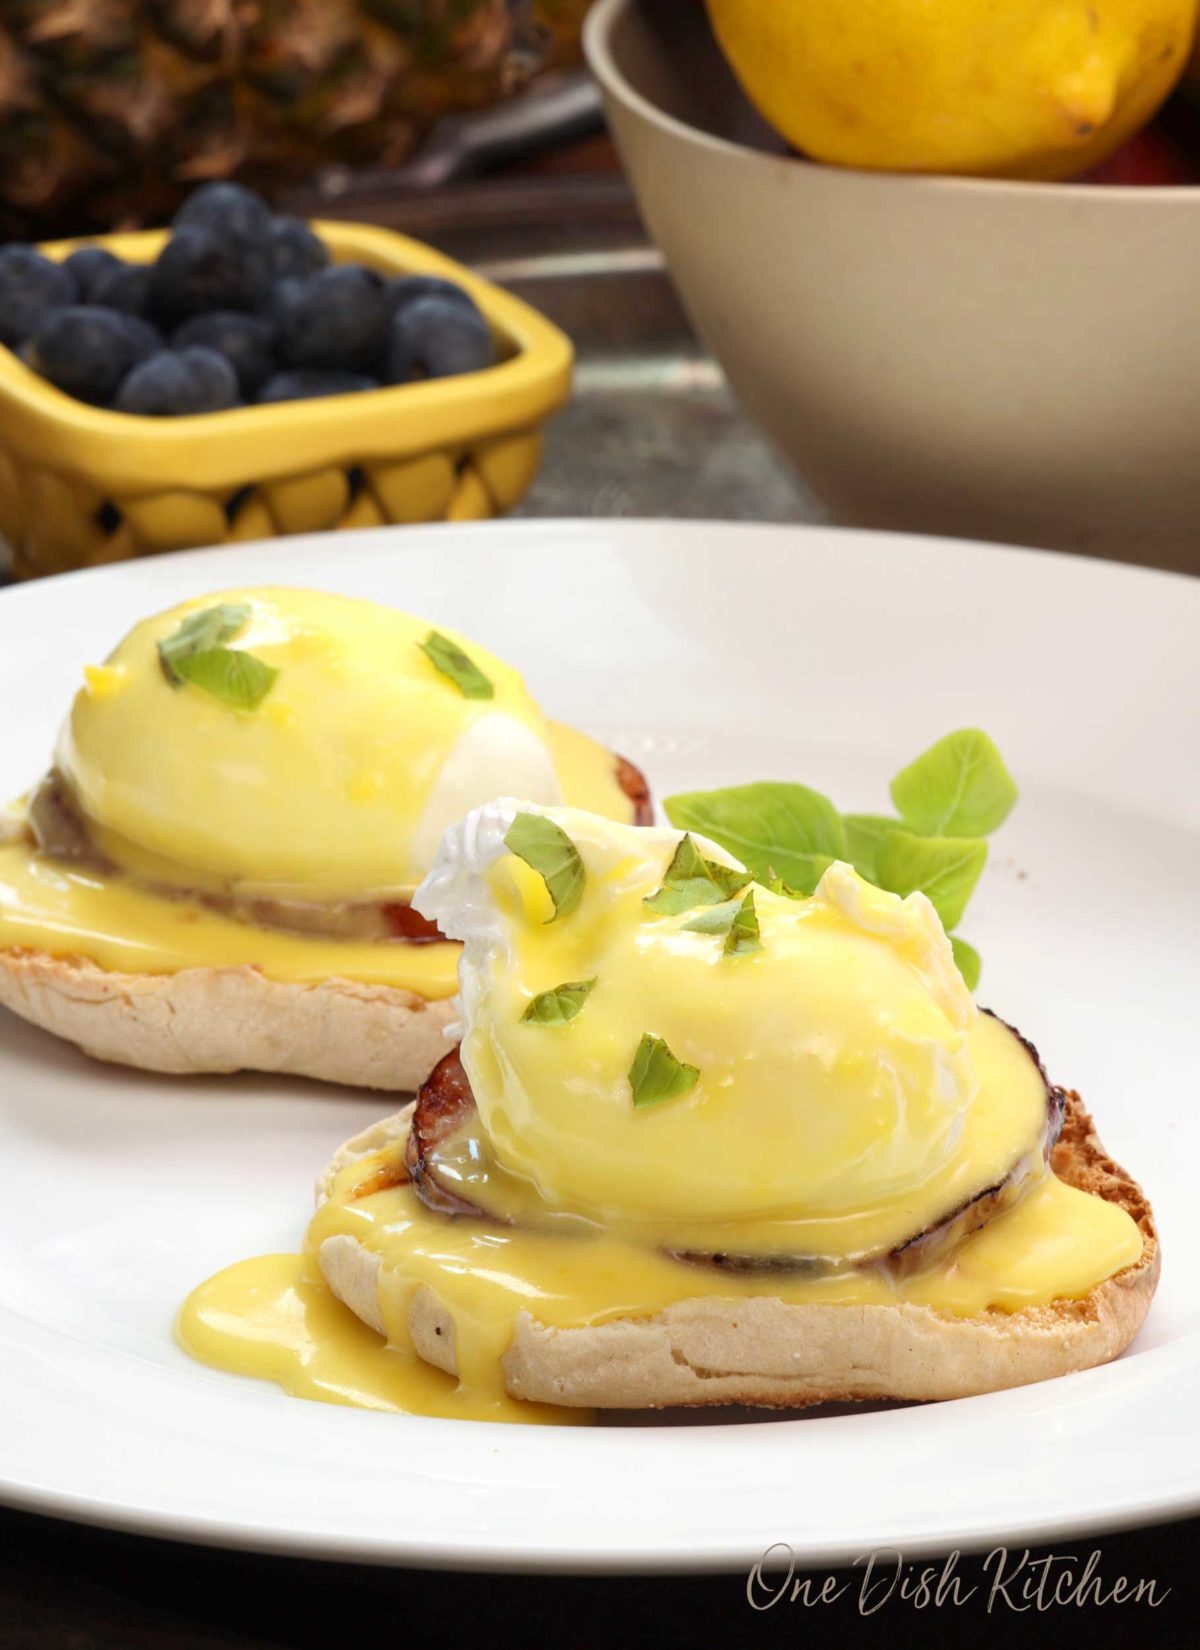 two eggs benedict with hollandaise sauce over the top on a white plate next to a yellow bowl of blueberries.